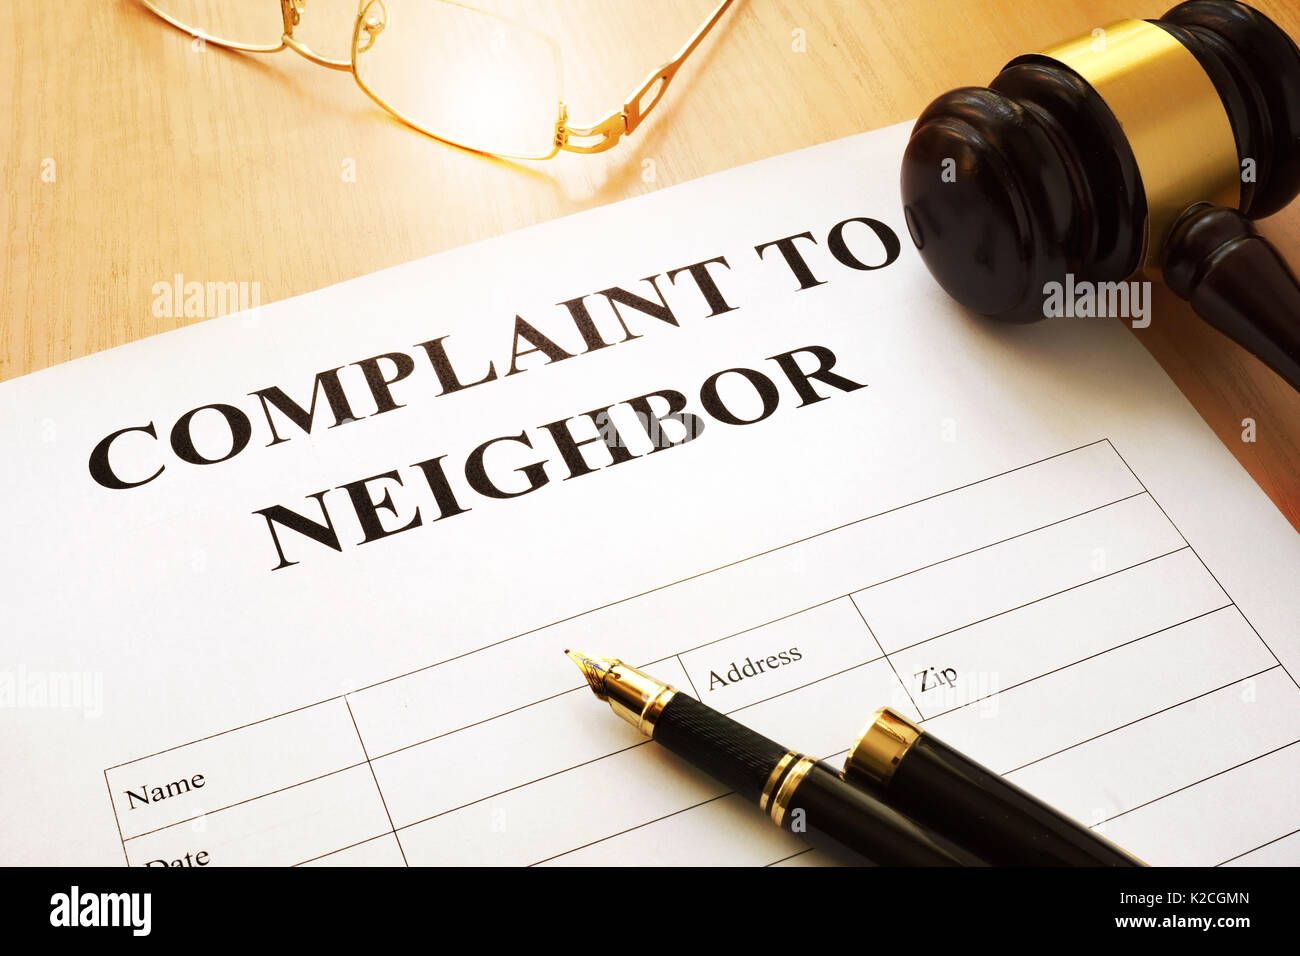 Complaint to neighbor on a table. Stock Photo